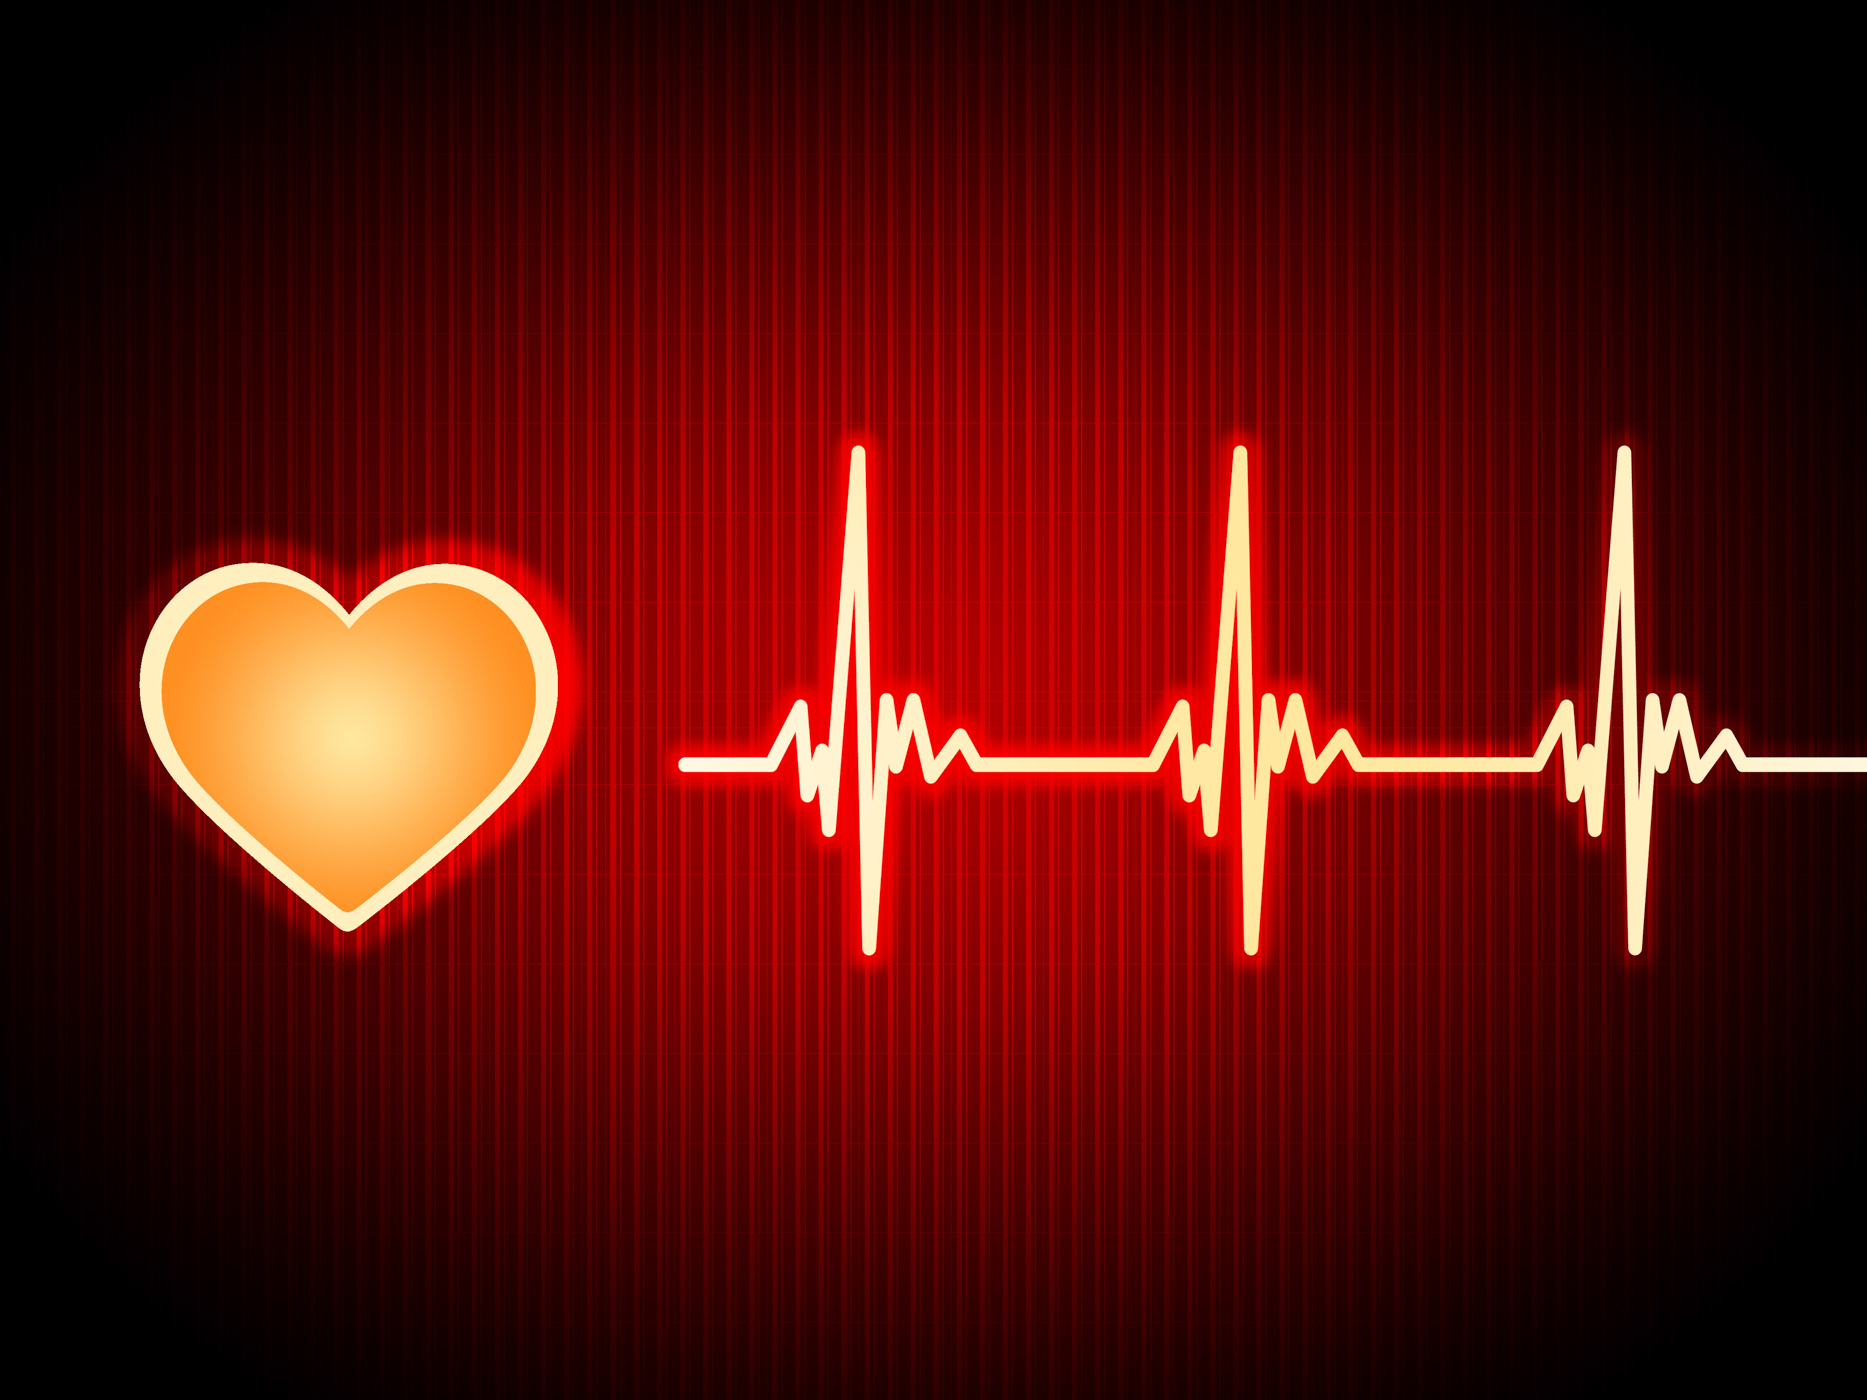 Red heart background shows pumping blood and alive photo